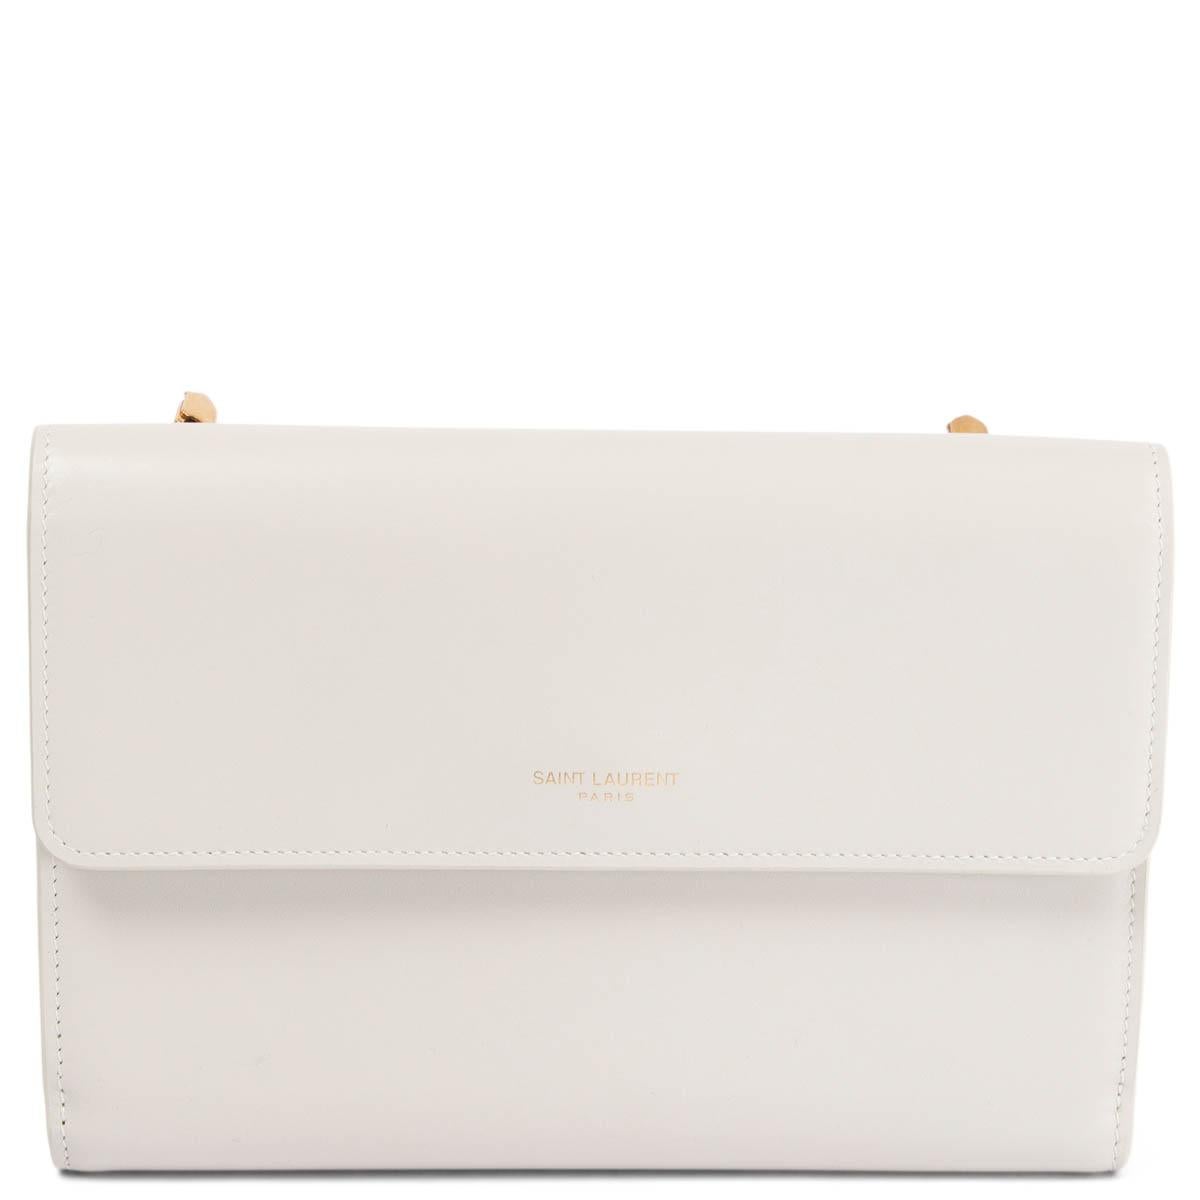 Gold SAINT LAURENT ivory leather DOUBLE FLAP Bag w GOLD CHAIN For Sale